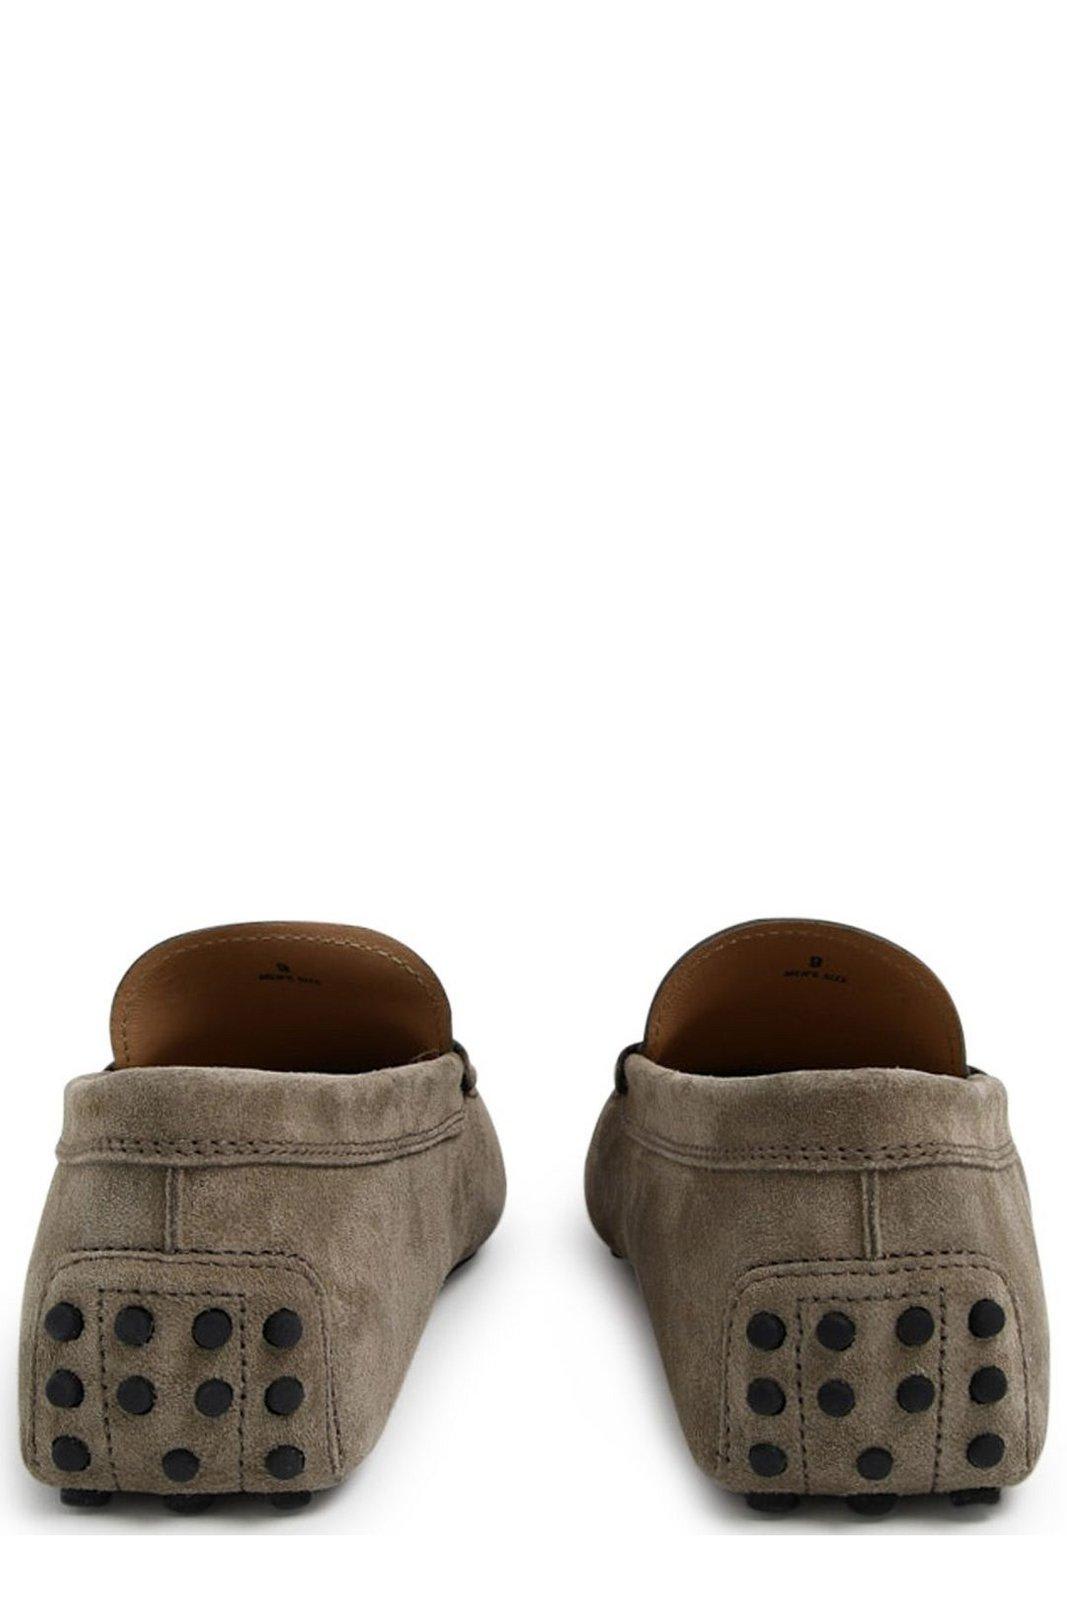 Shop Tod's Gommino Penny-bar Driving Shoes In Grey